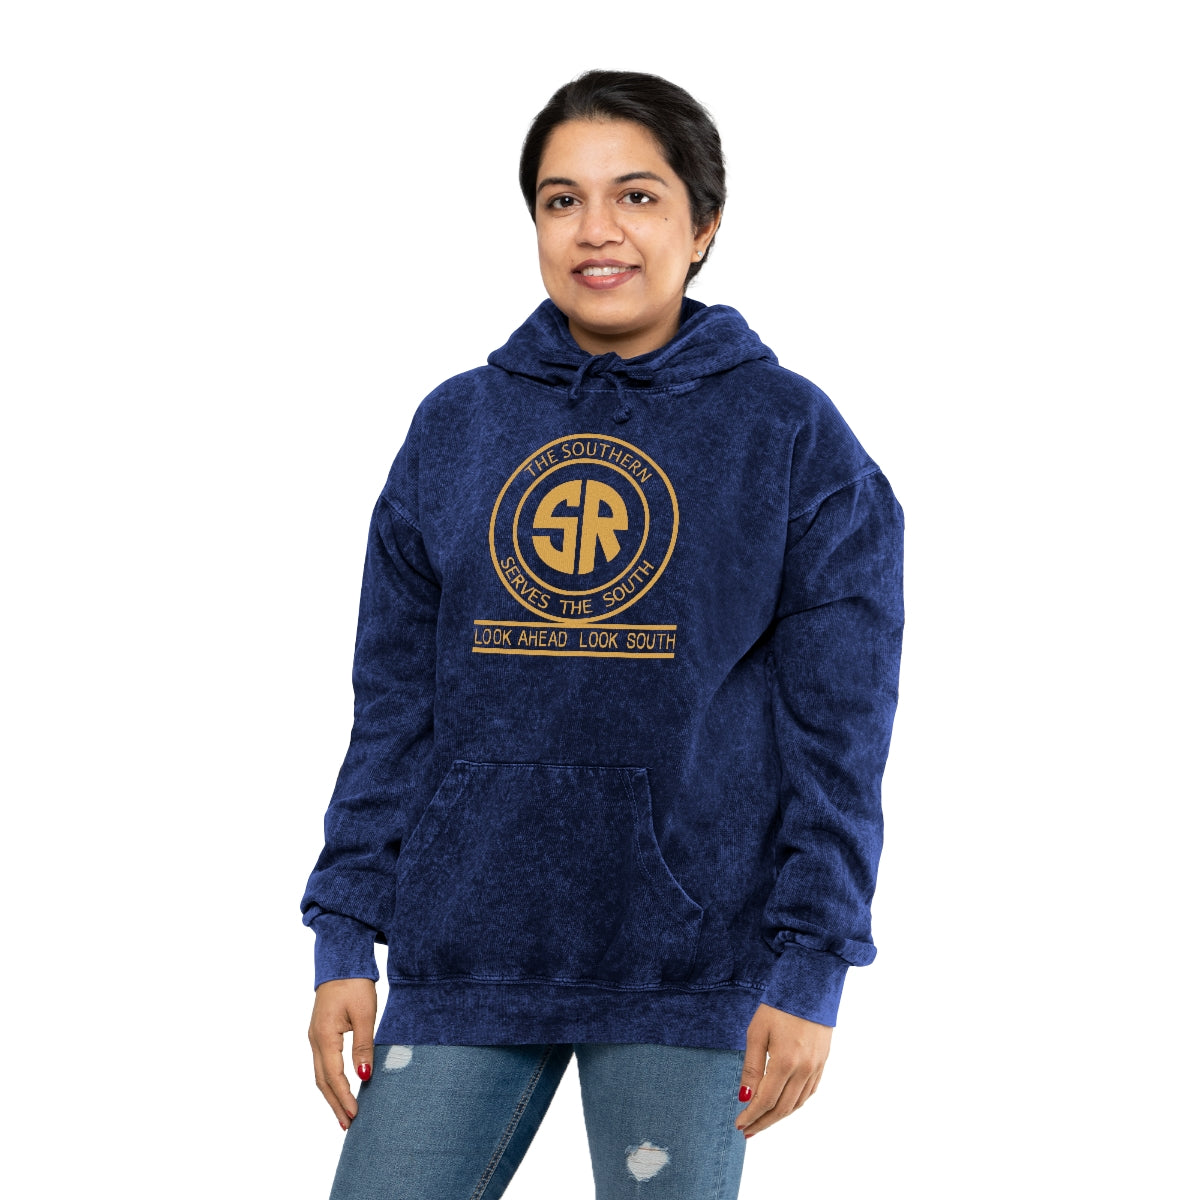 The Southern Serves the South Unisex Mineral Wash Hoodie - Broken Knuckle Apparel